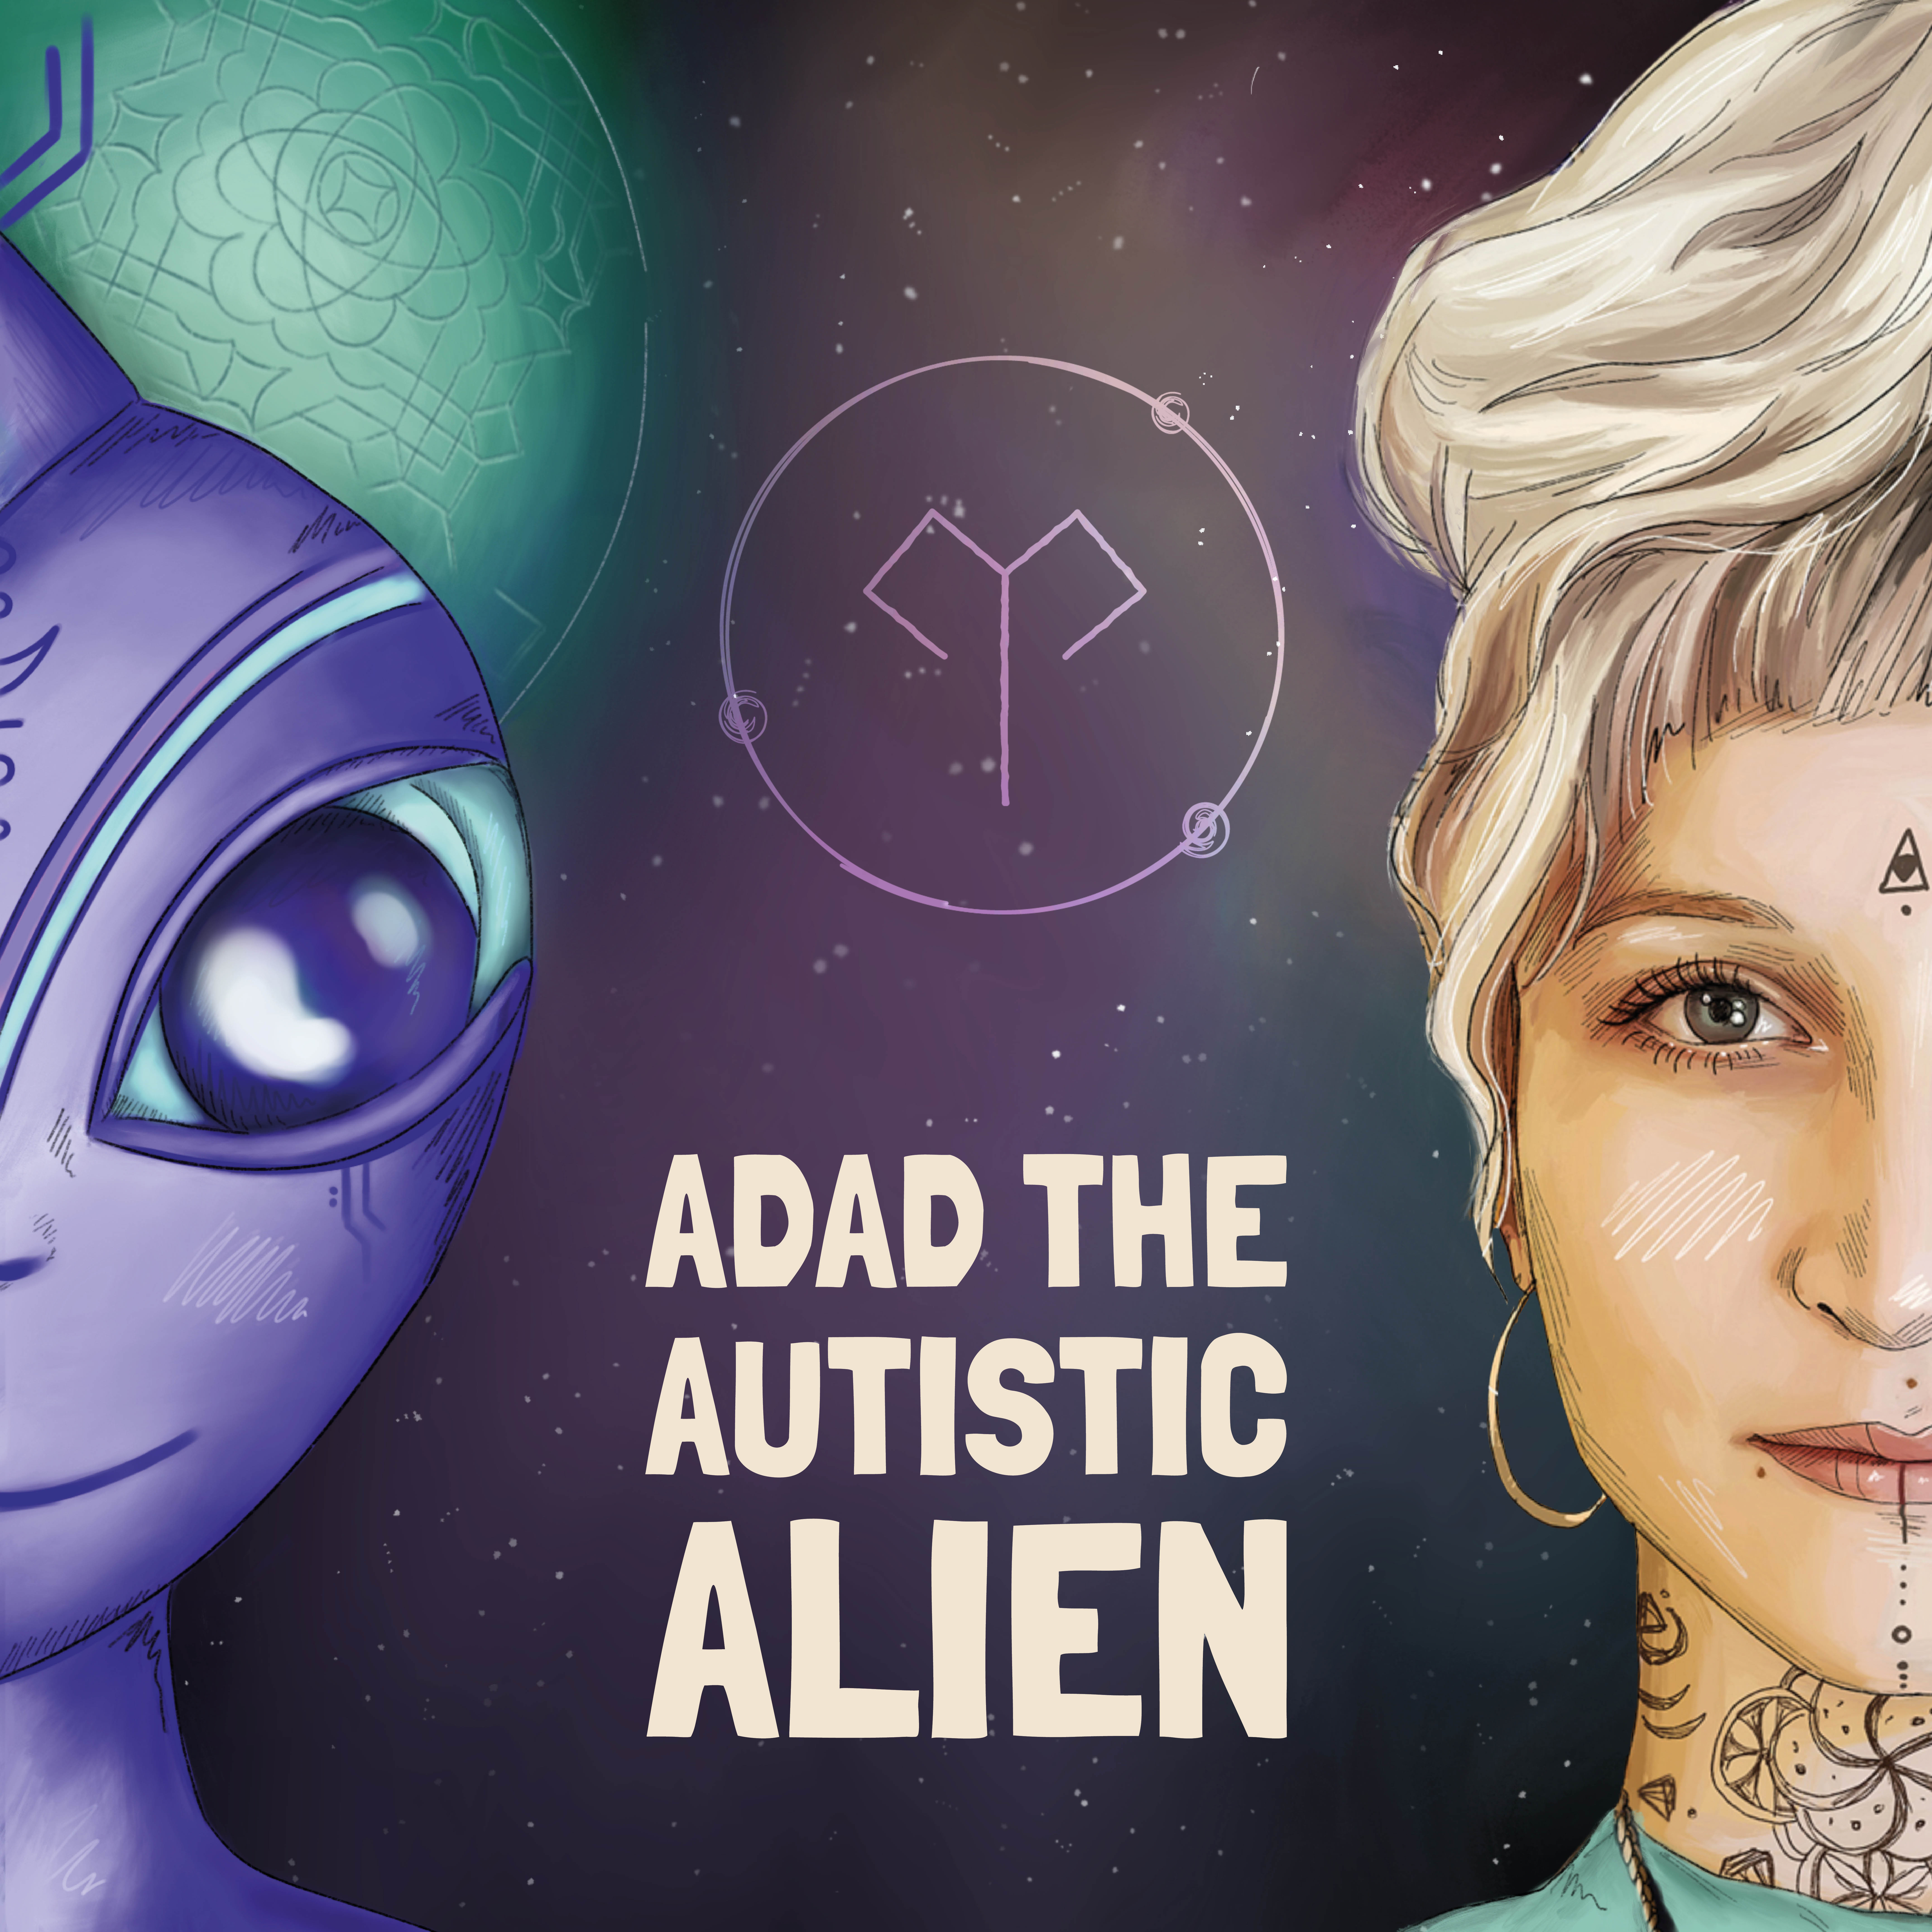 Adad the Autistic Alien Cover With Tree